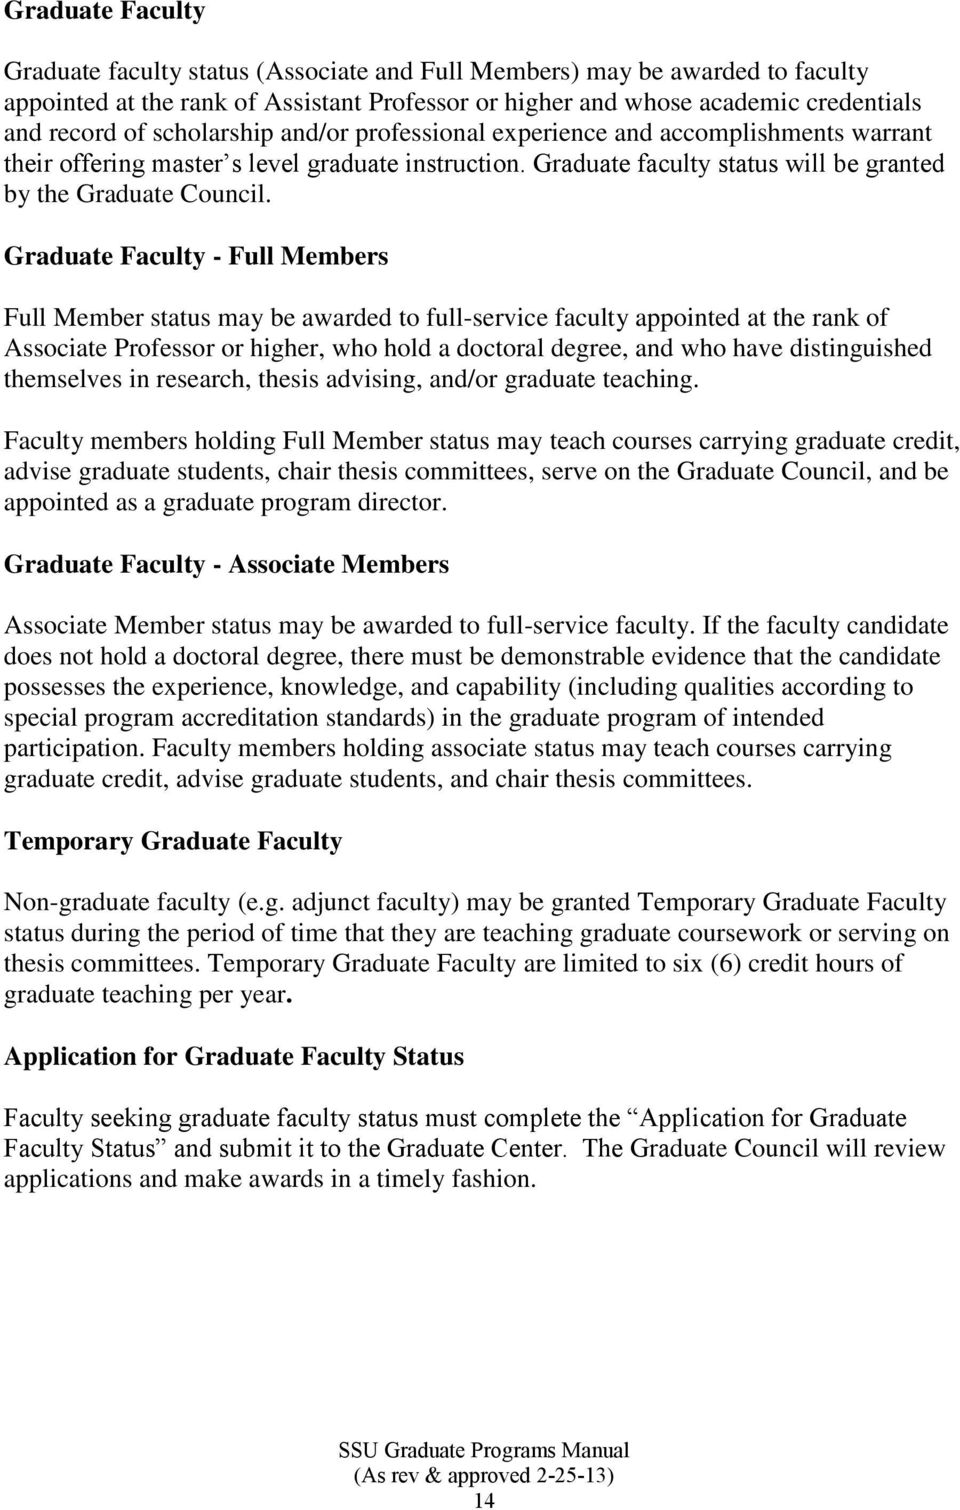 Graduate Faculty - Full Members Full Member status may be awarded to full-service faculty appointed at the rank of Associate Professor or higher, who hold a doctoral degree, and who have